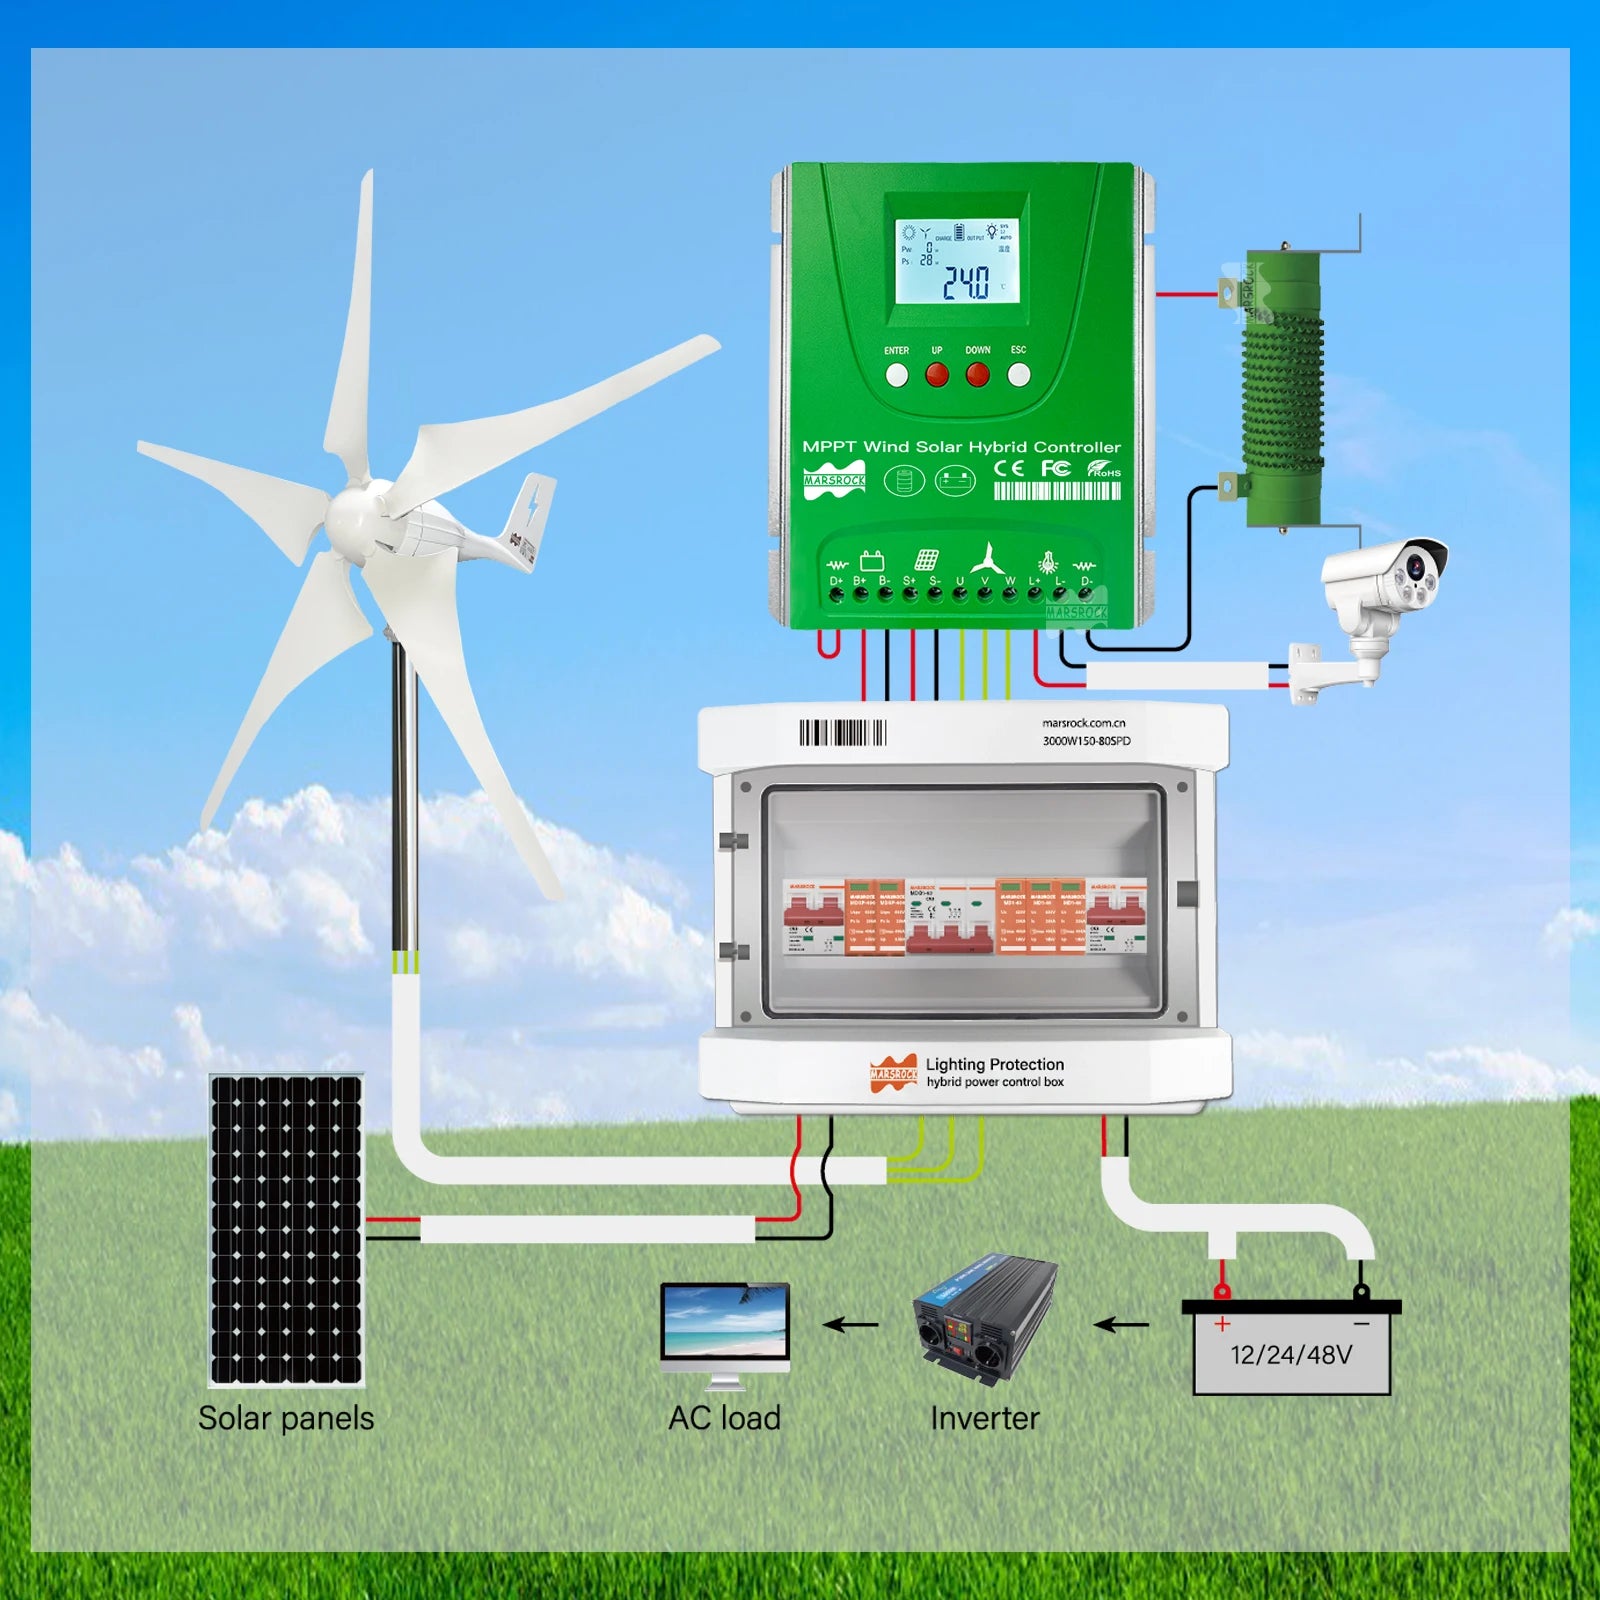 Controller for wind and solar power systems with 12V, 24V, or 48V input and features like equalization and protection.